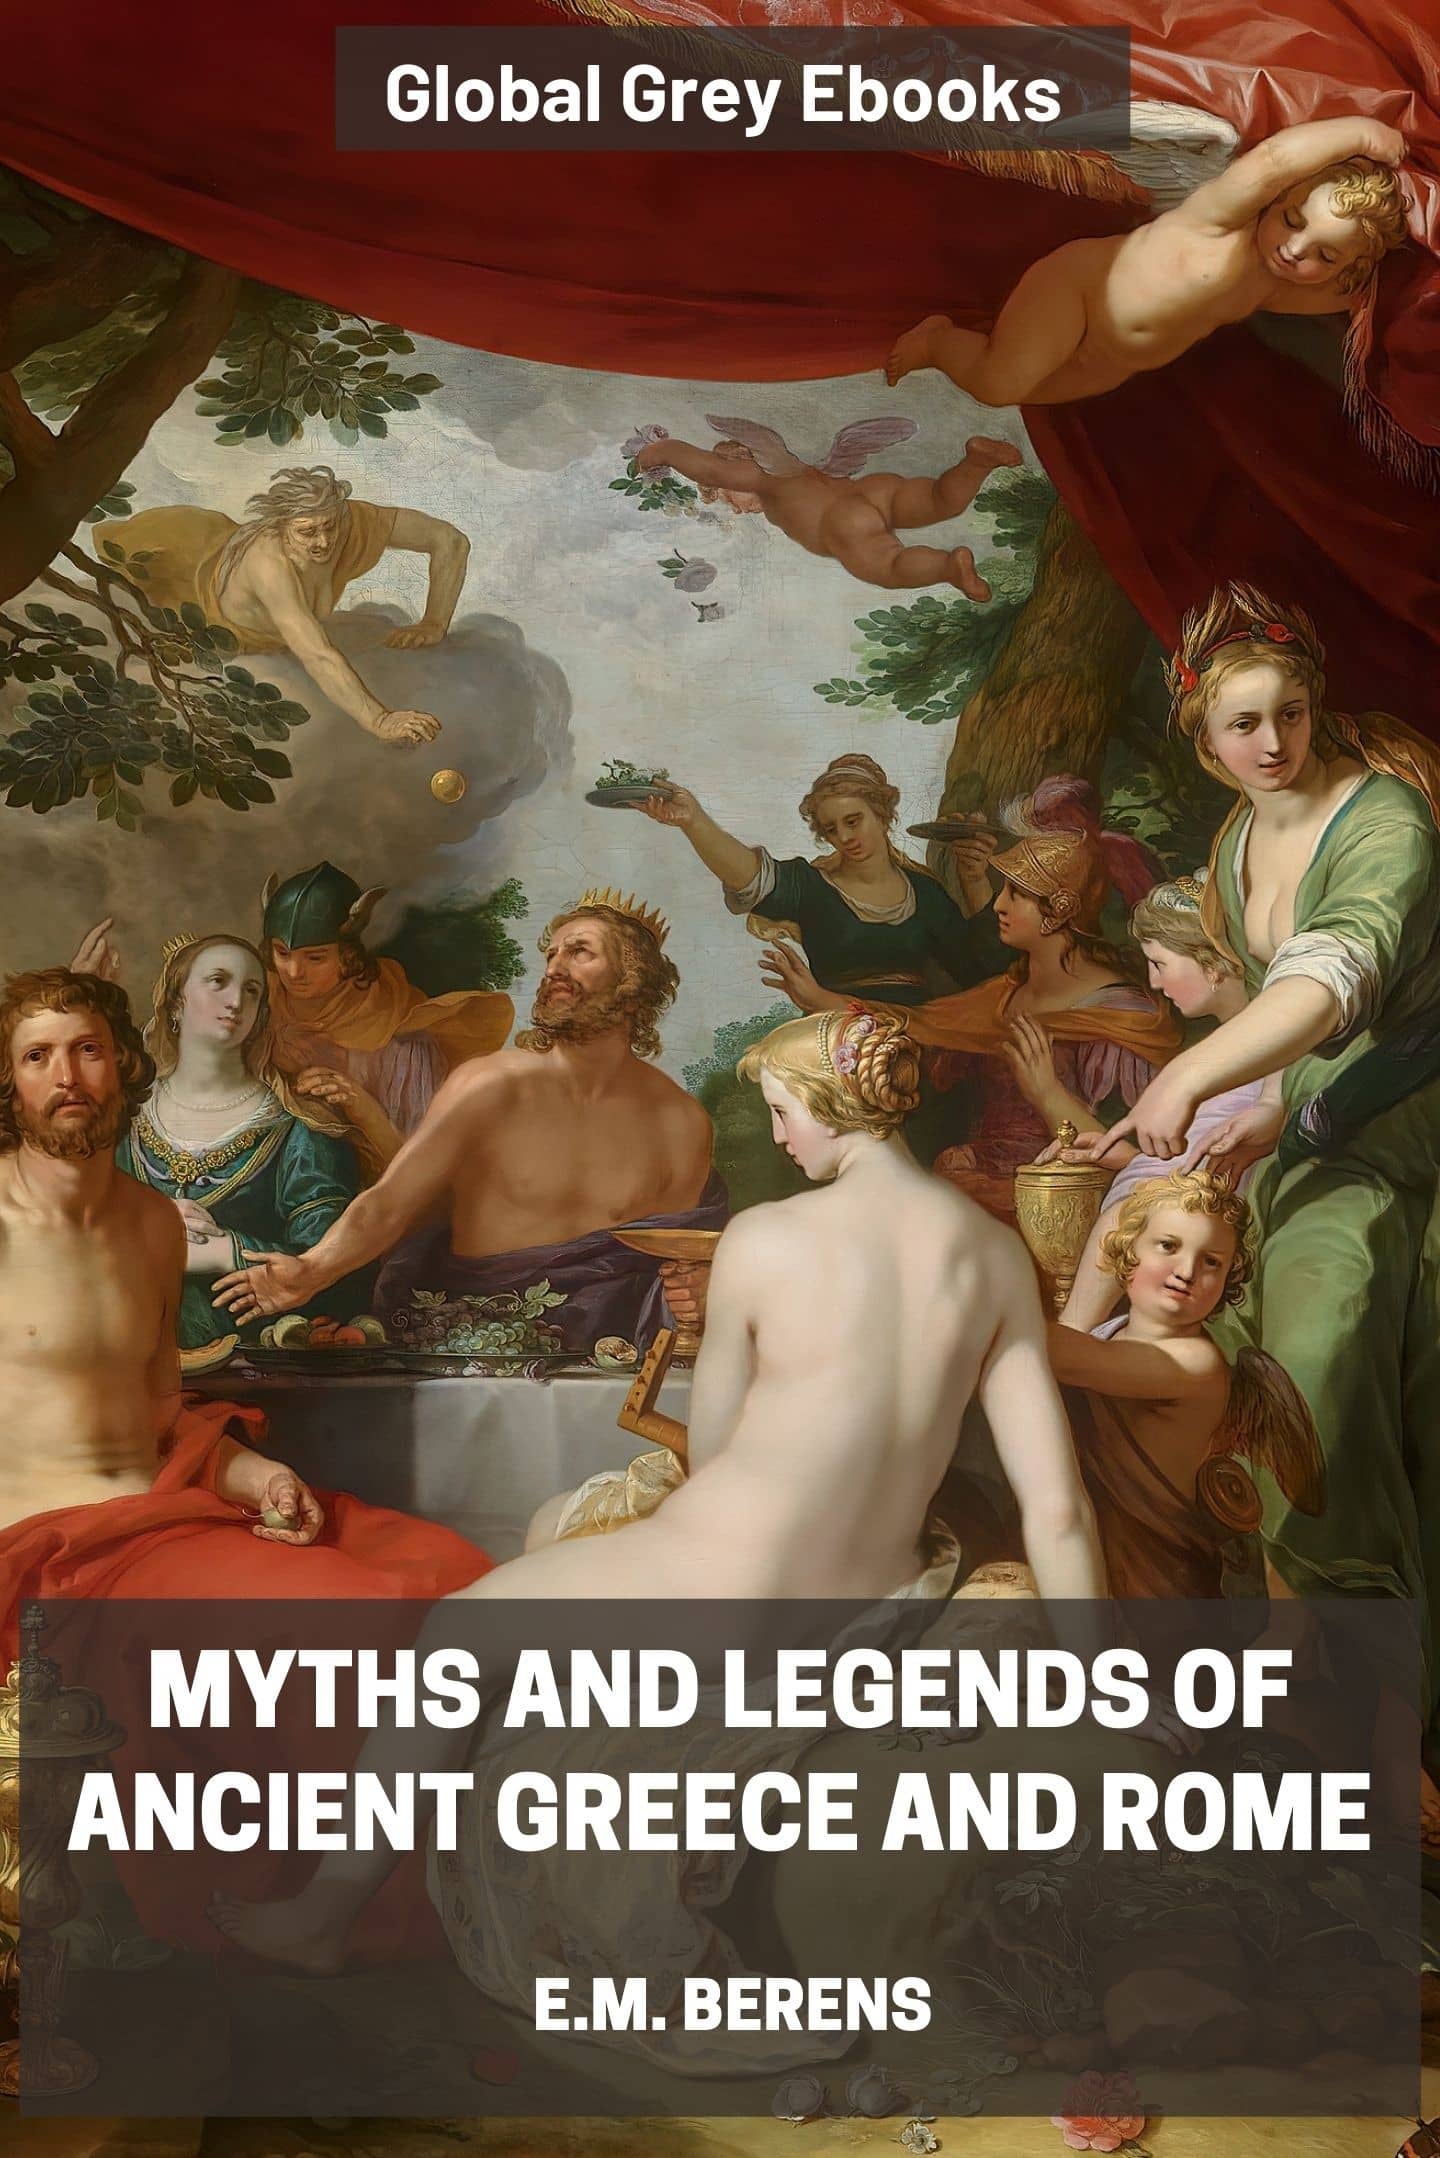 Myths And Legends Of Ancient Greece And Rome By Em Berens Free Ebook Global Grey Ebooks